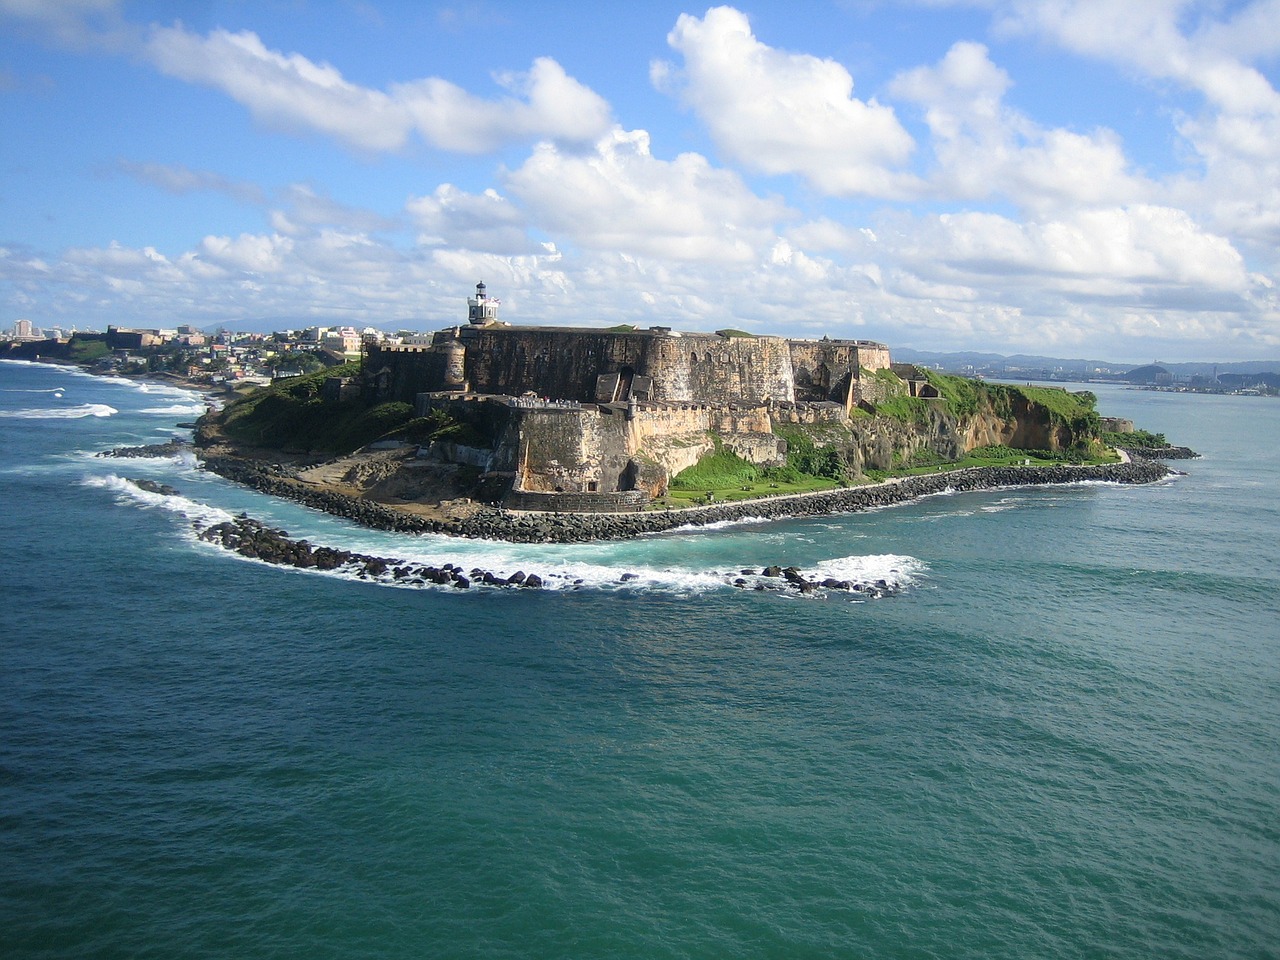 Puerto Rico: A 5-star Vacation Destination With World-class Attractions